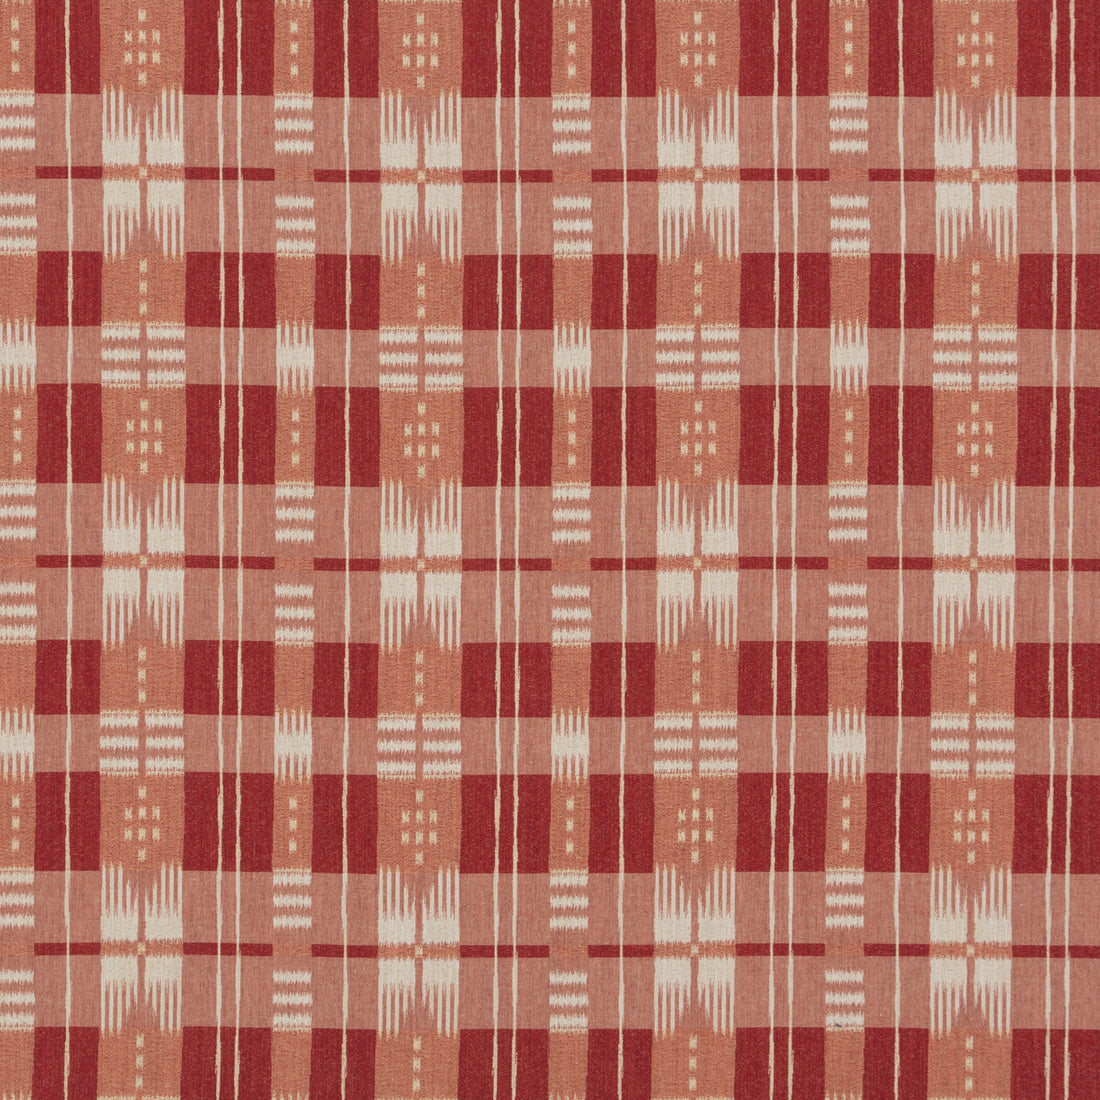 Mornas Plaid fabric in red color - pattern 8017105.19.0 - by Brunschwig &amp; Fils in the Durance collection